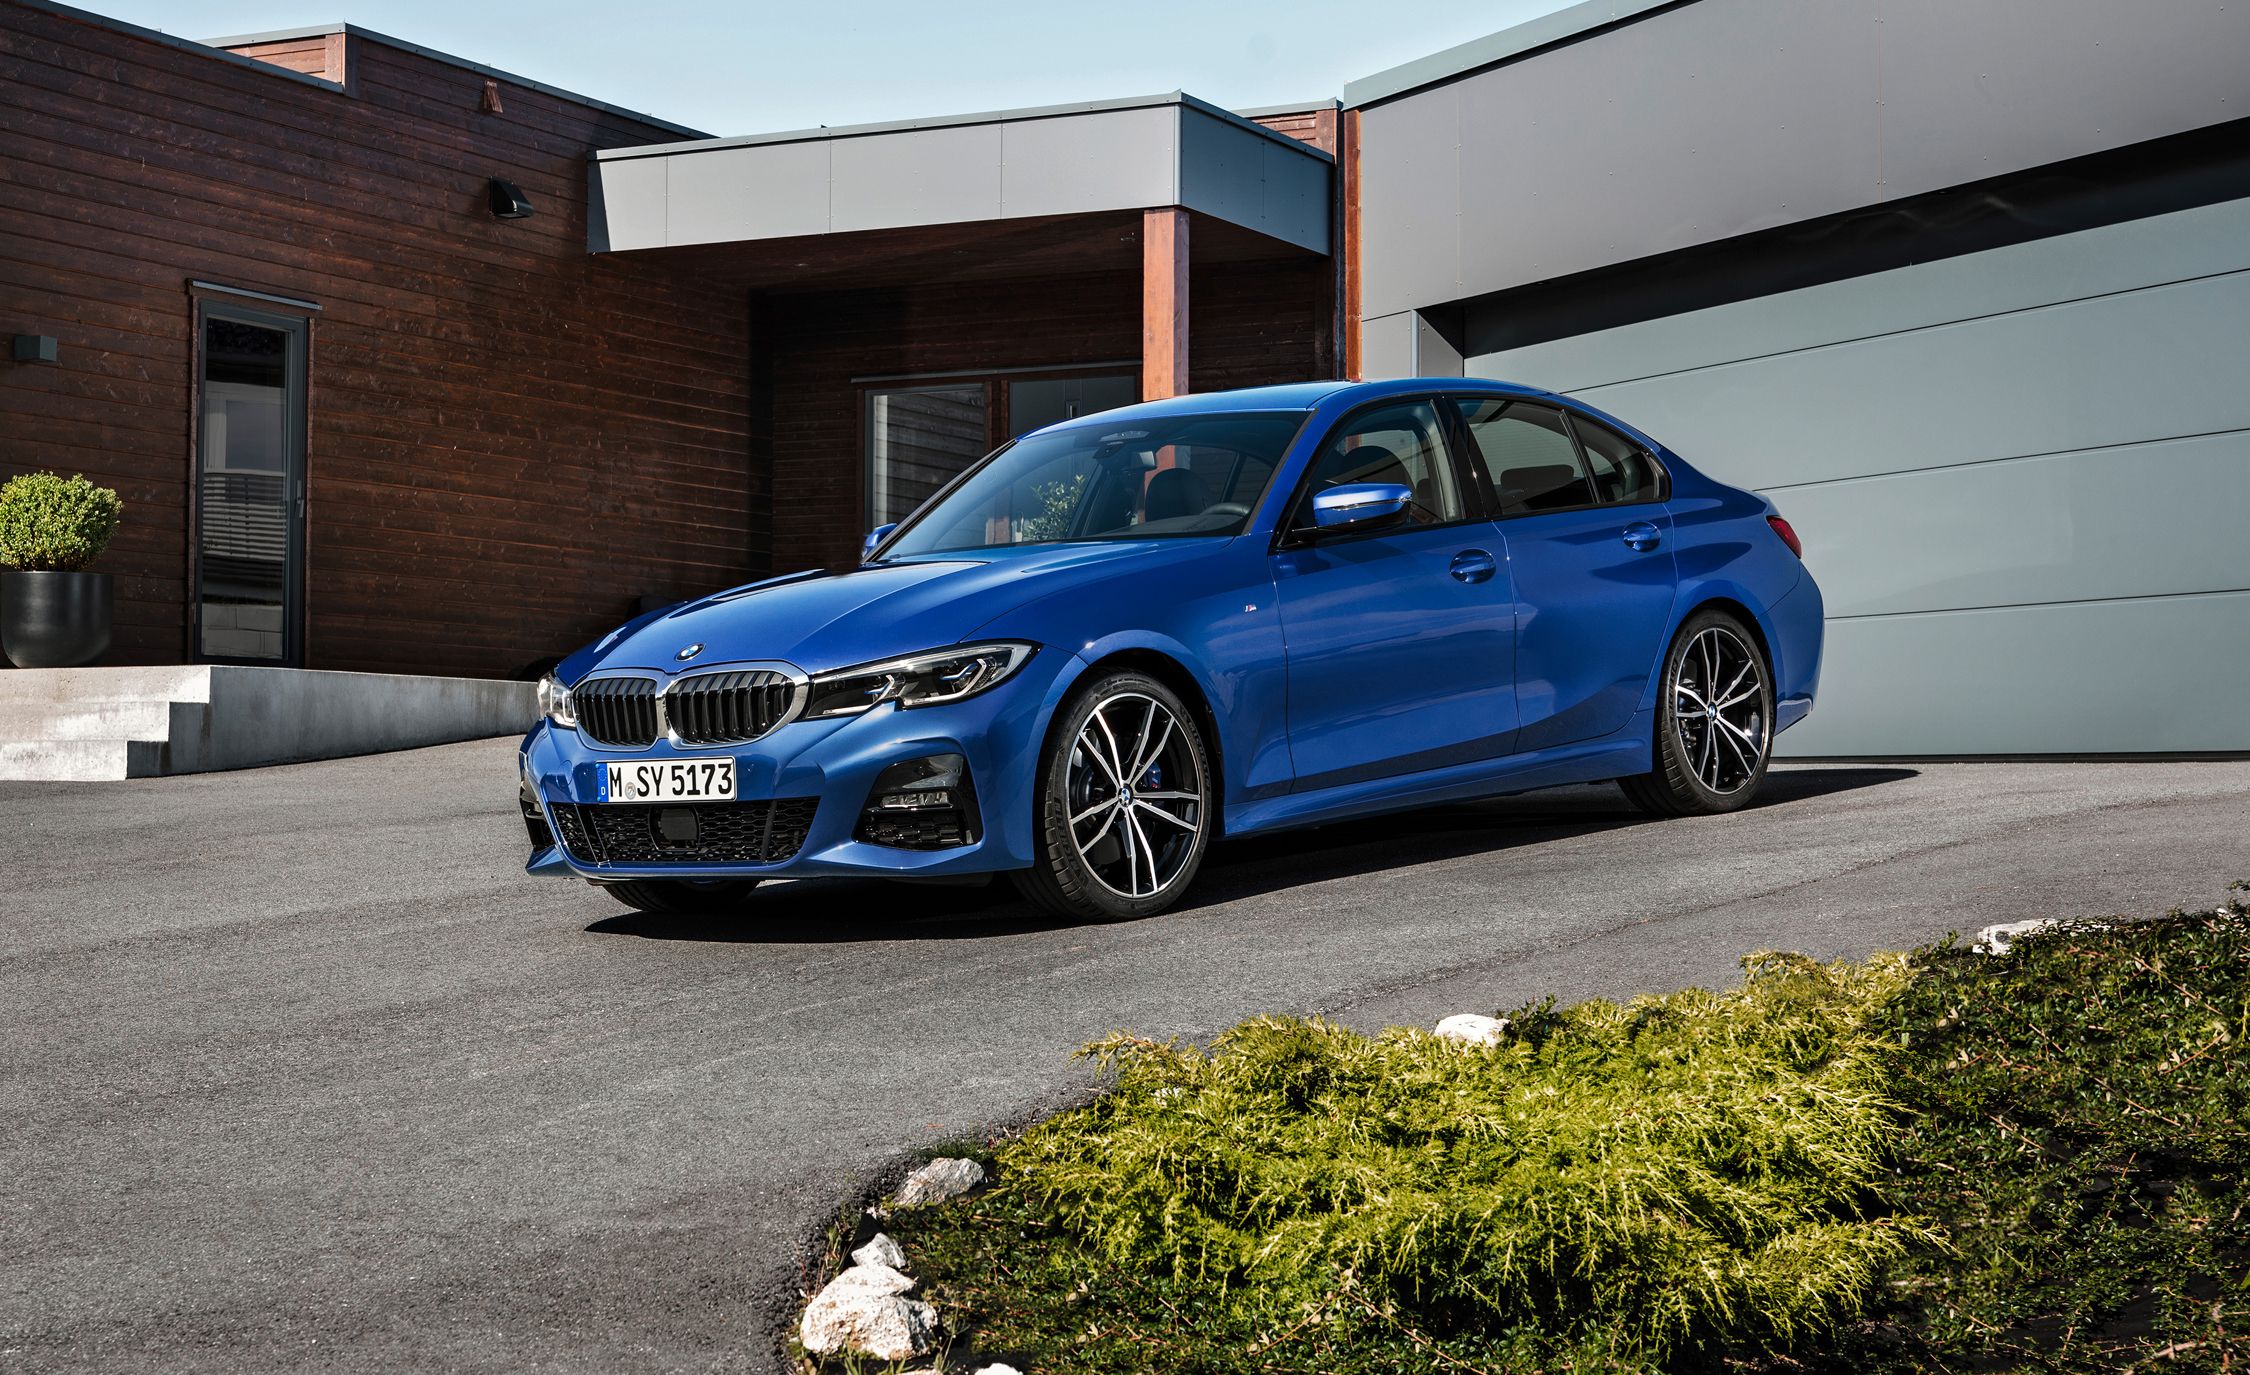 The 2019 BMW 3-series Already Has a Plethora of M Performance Parts